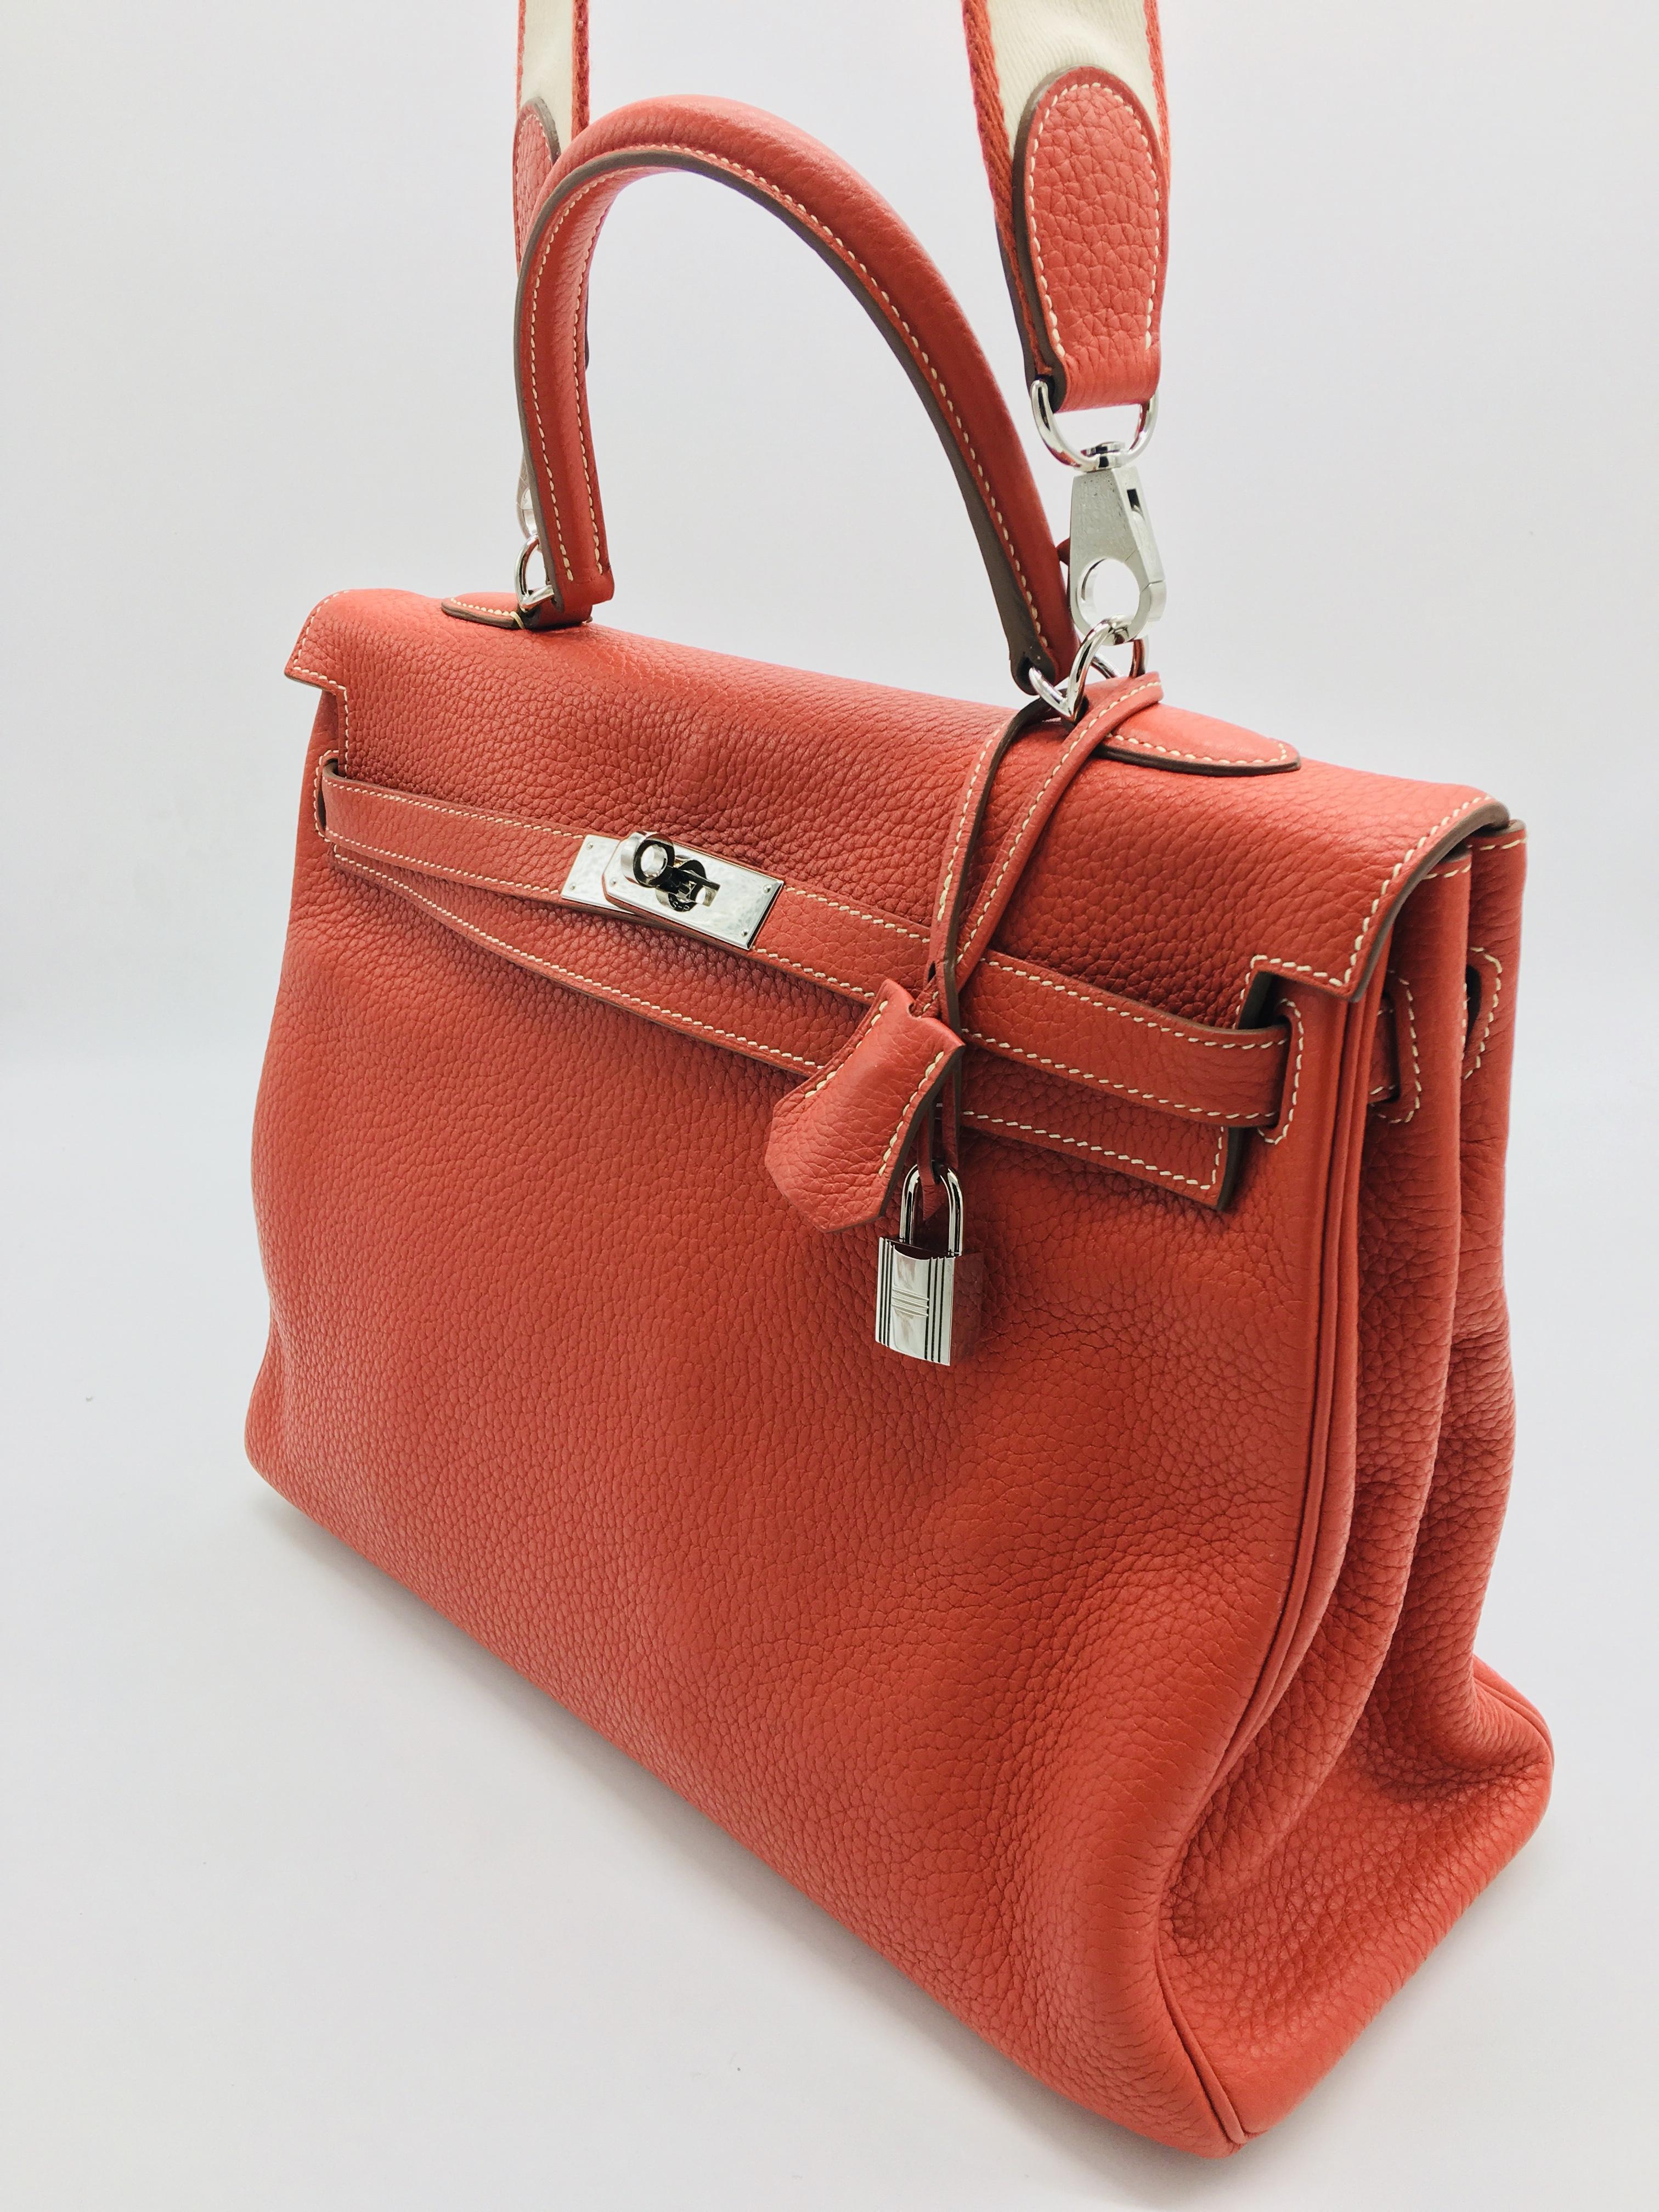 Hermes Sanguine Kelly 35cm in Clemence In Good Condition For Sale In London, GB